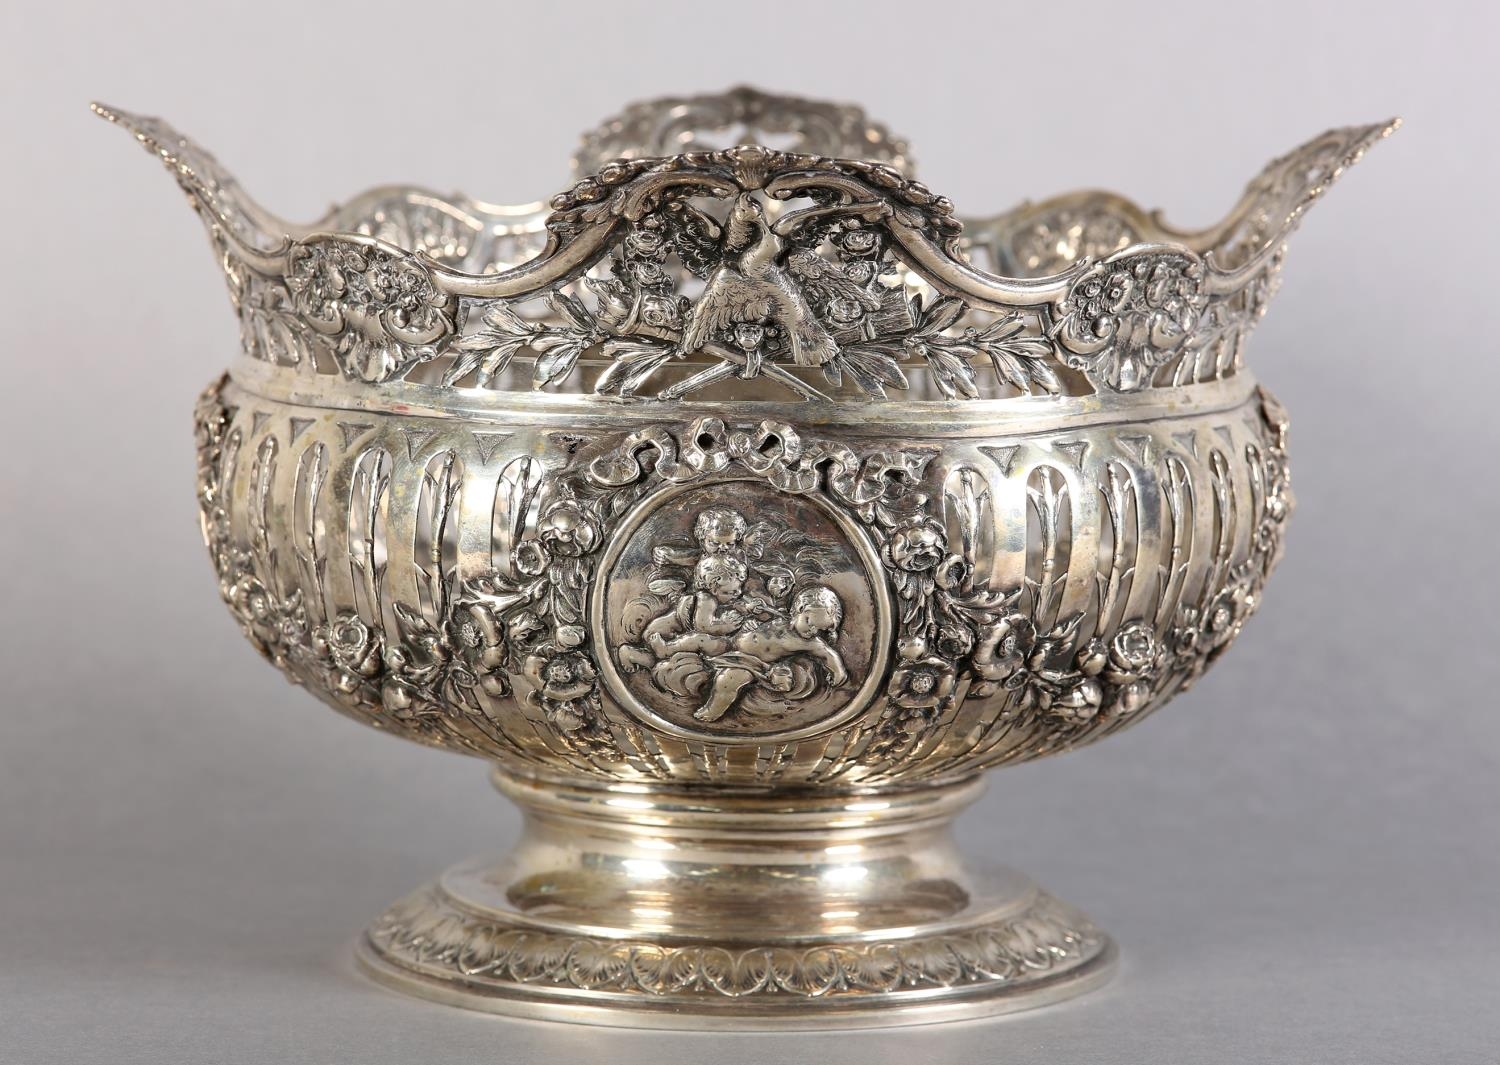 A LATE 19TH/EARLY 20TH CENTURY GERMAN .800 silver fruit bowl, pierced and embossed with floral - Image 2 of 7